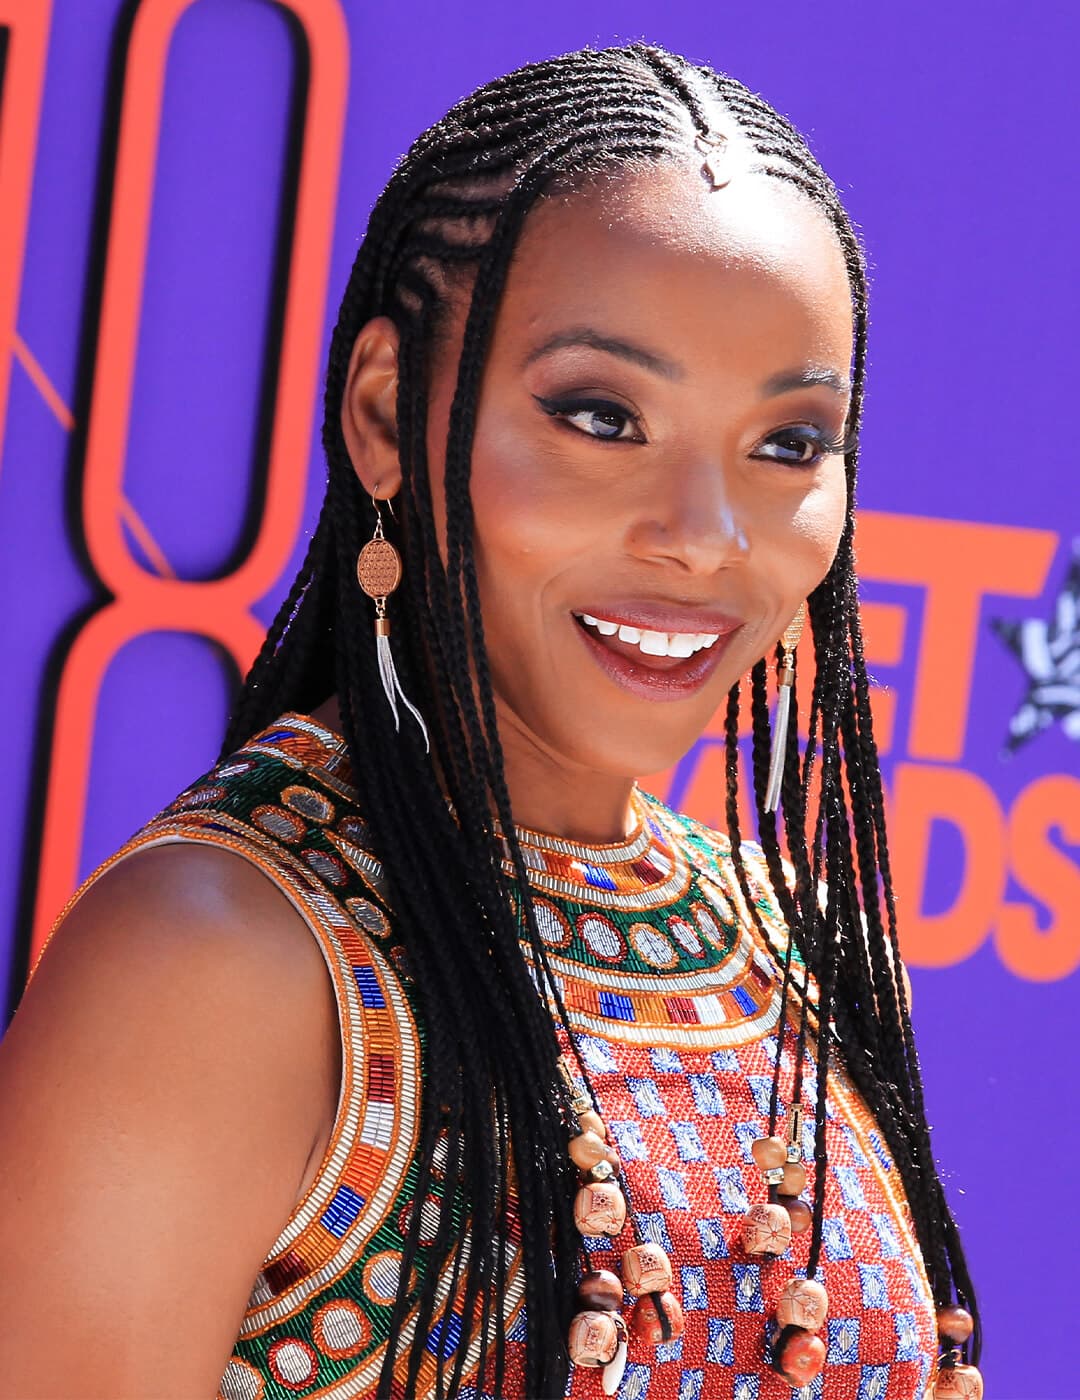 Erica Ash in a tribal patterned outfit rocking her braided hairstyle